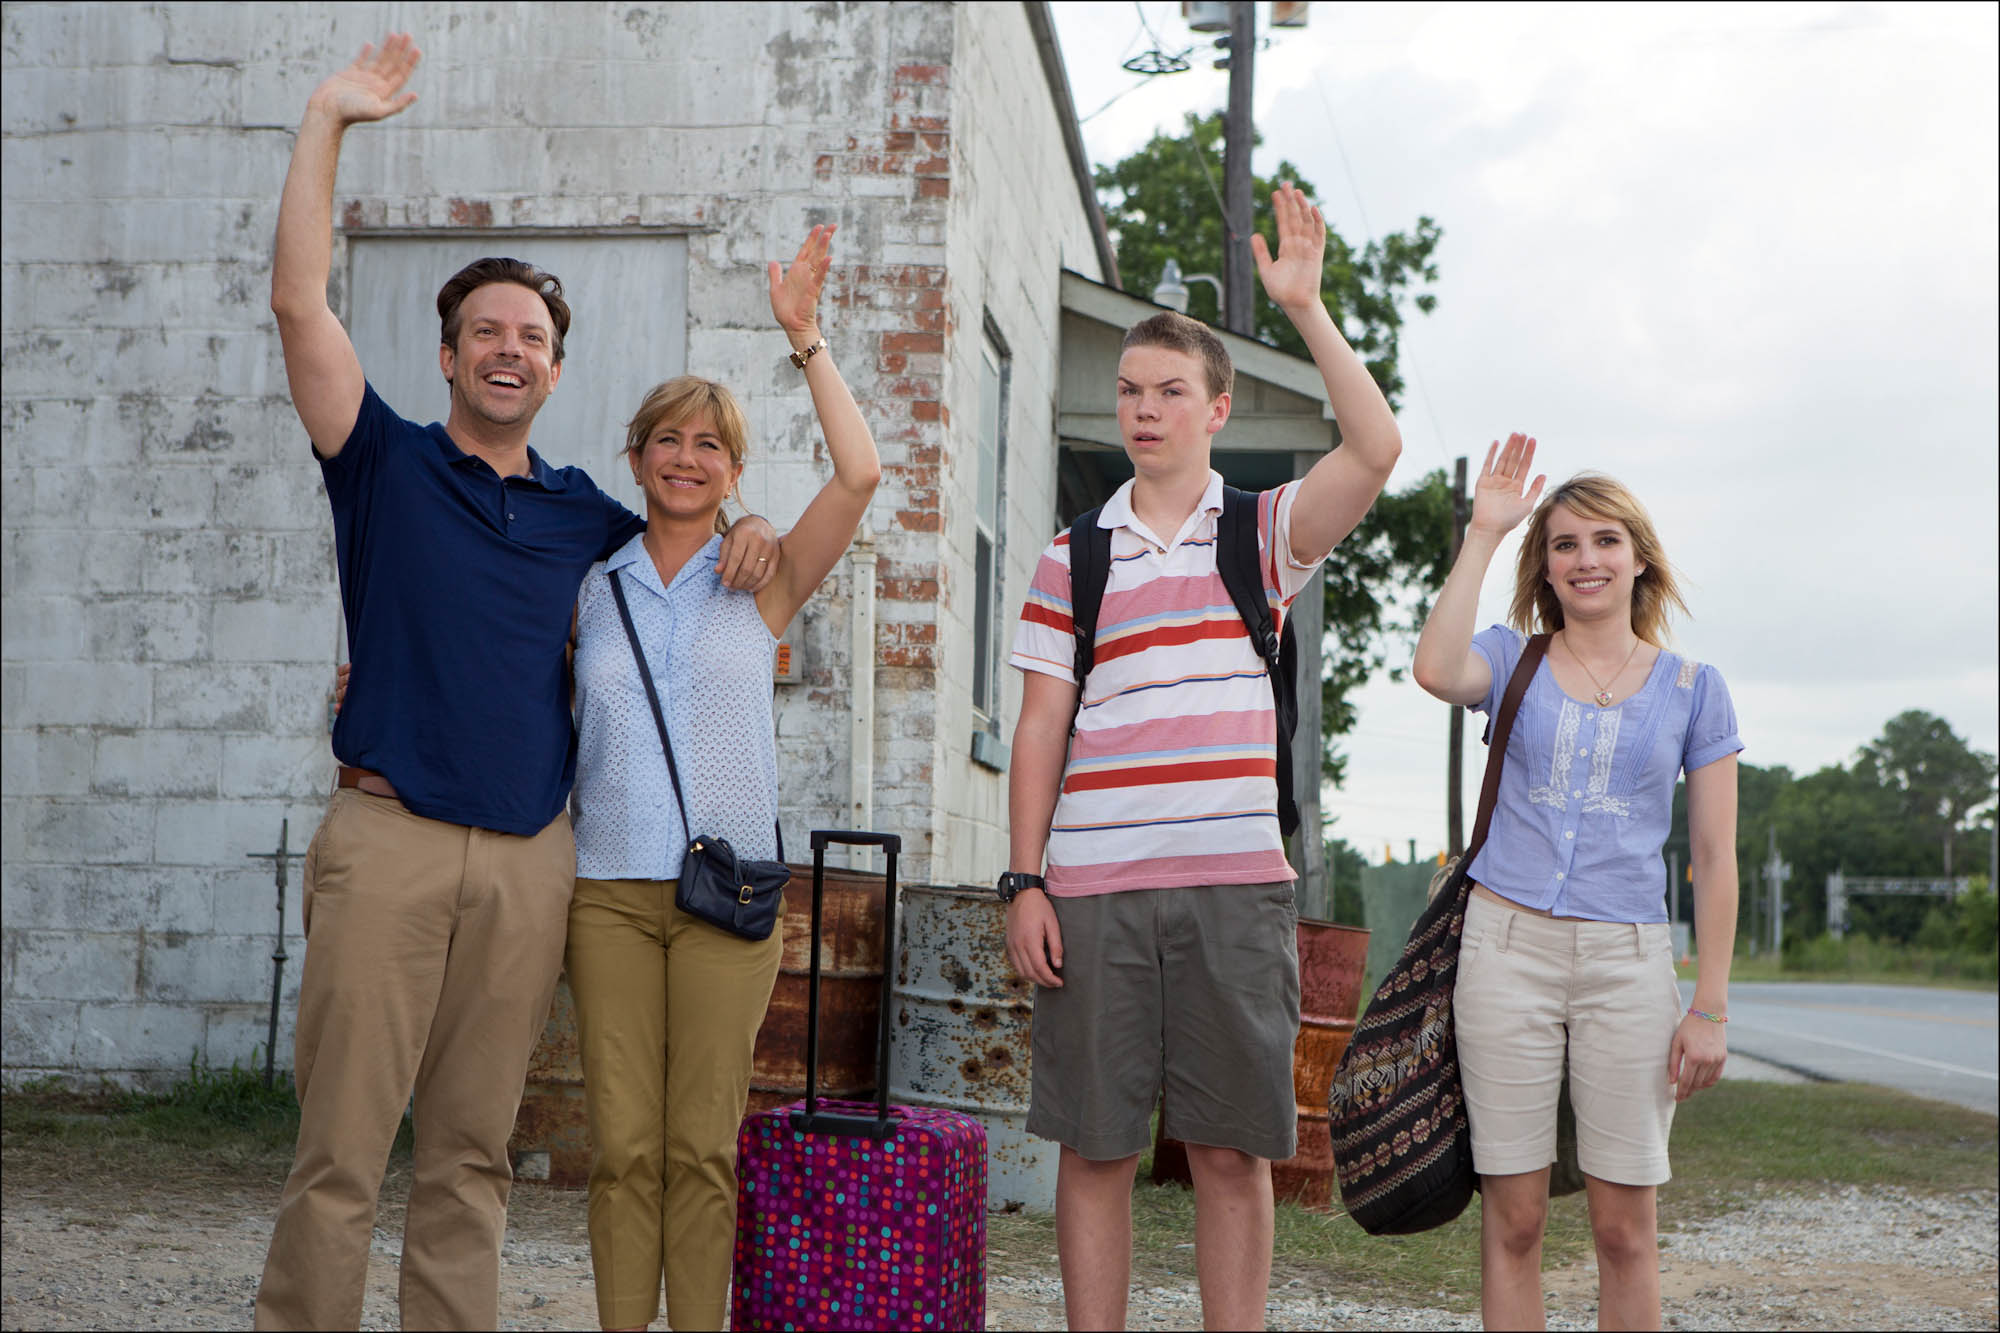 WE’RE THE MILLERS is Passable but far from Great